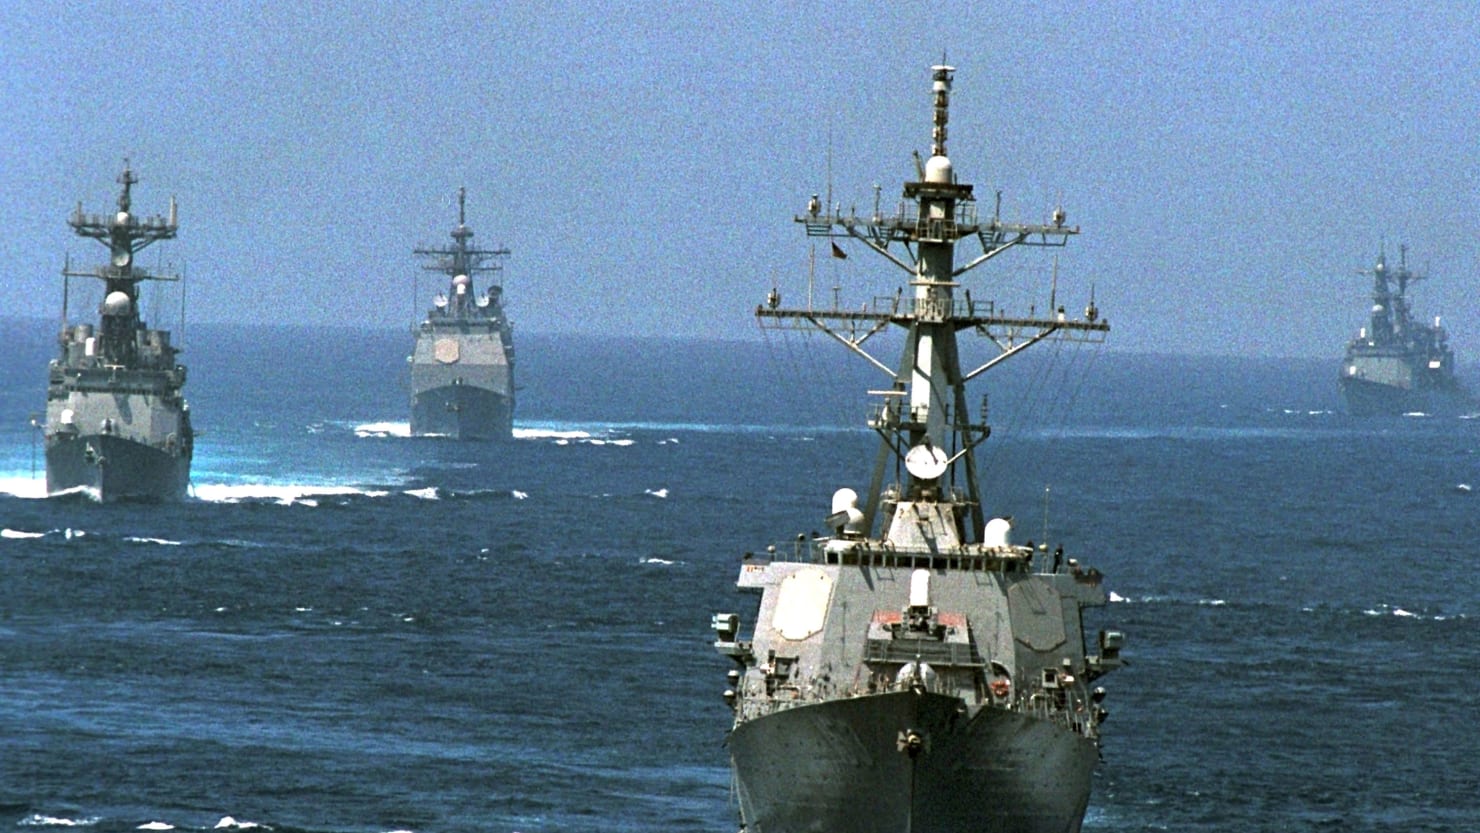 Two US Navy ships in the Middle East are battling COVID-19 outbreaks